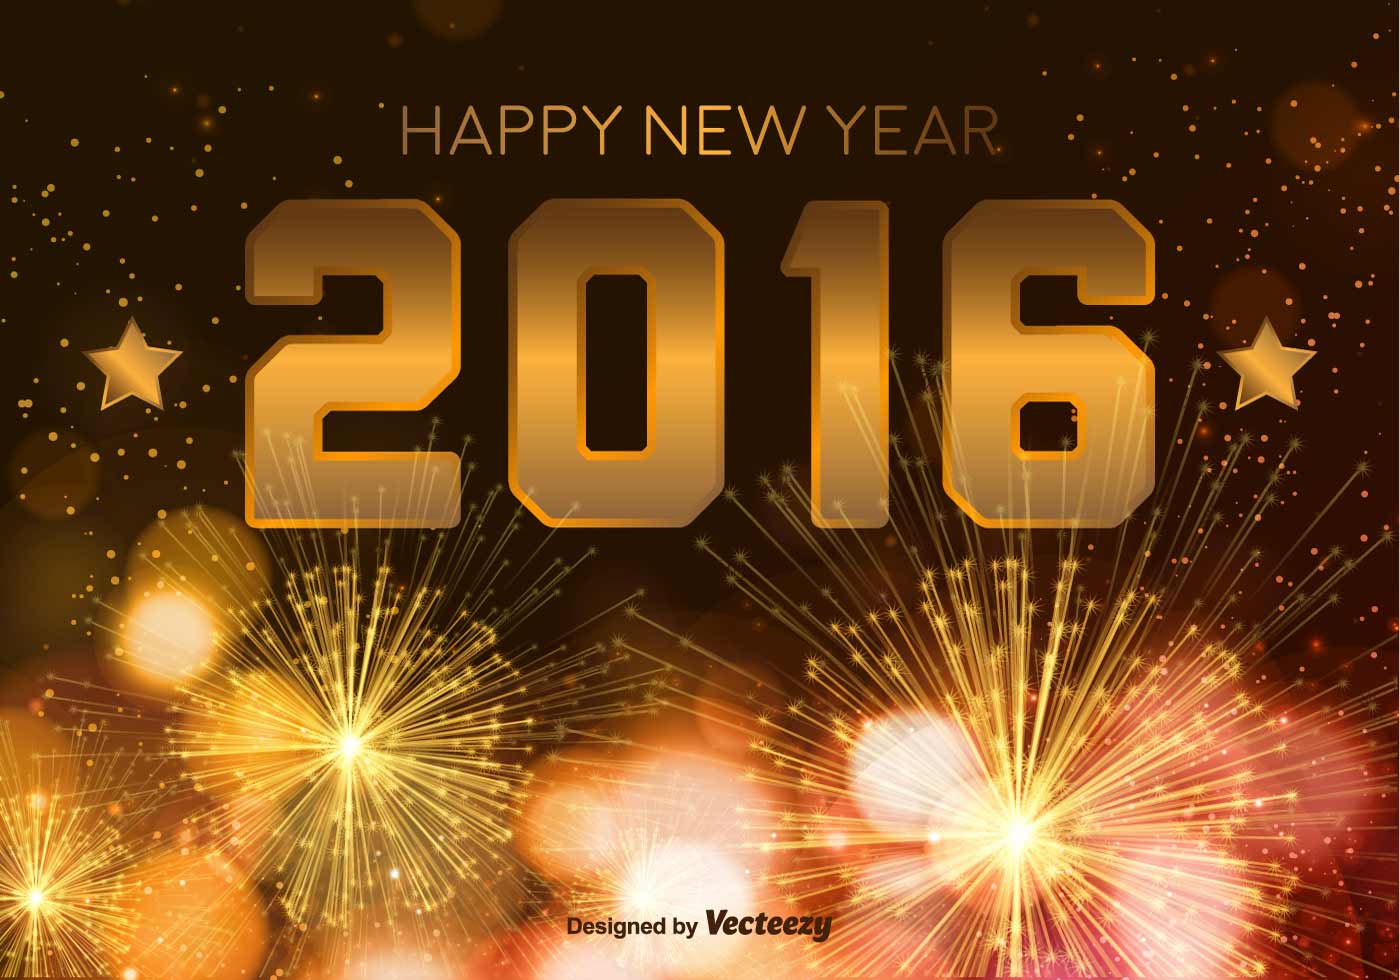 Happy New Year 2016 Clipart Image